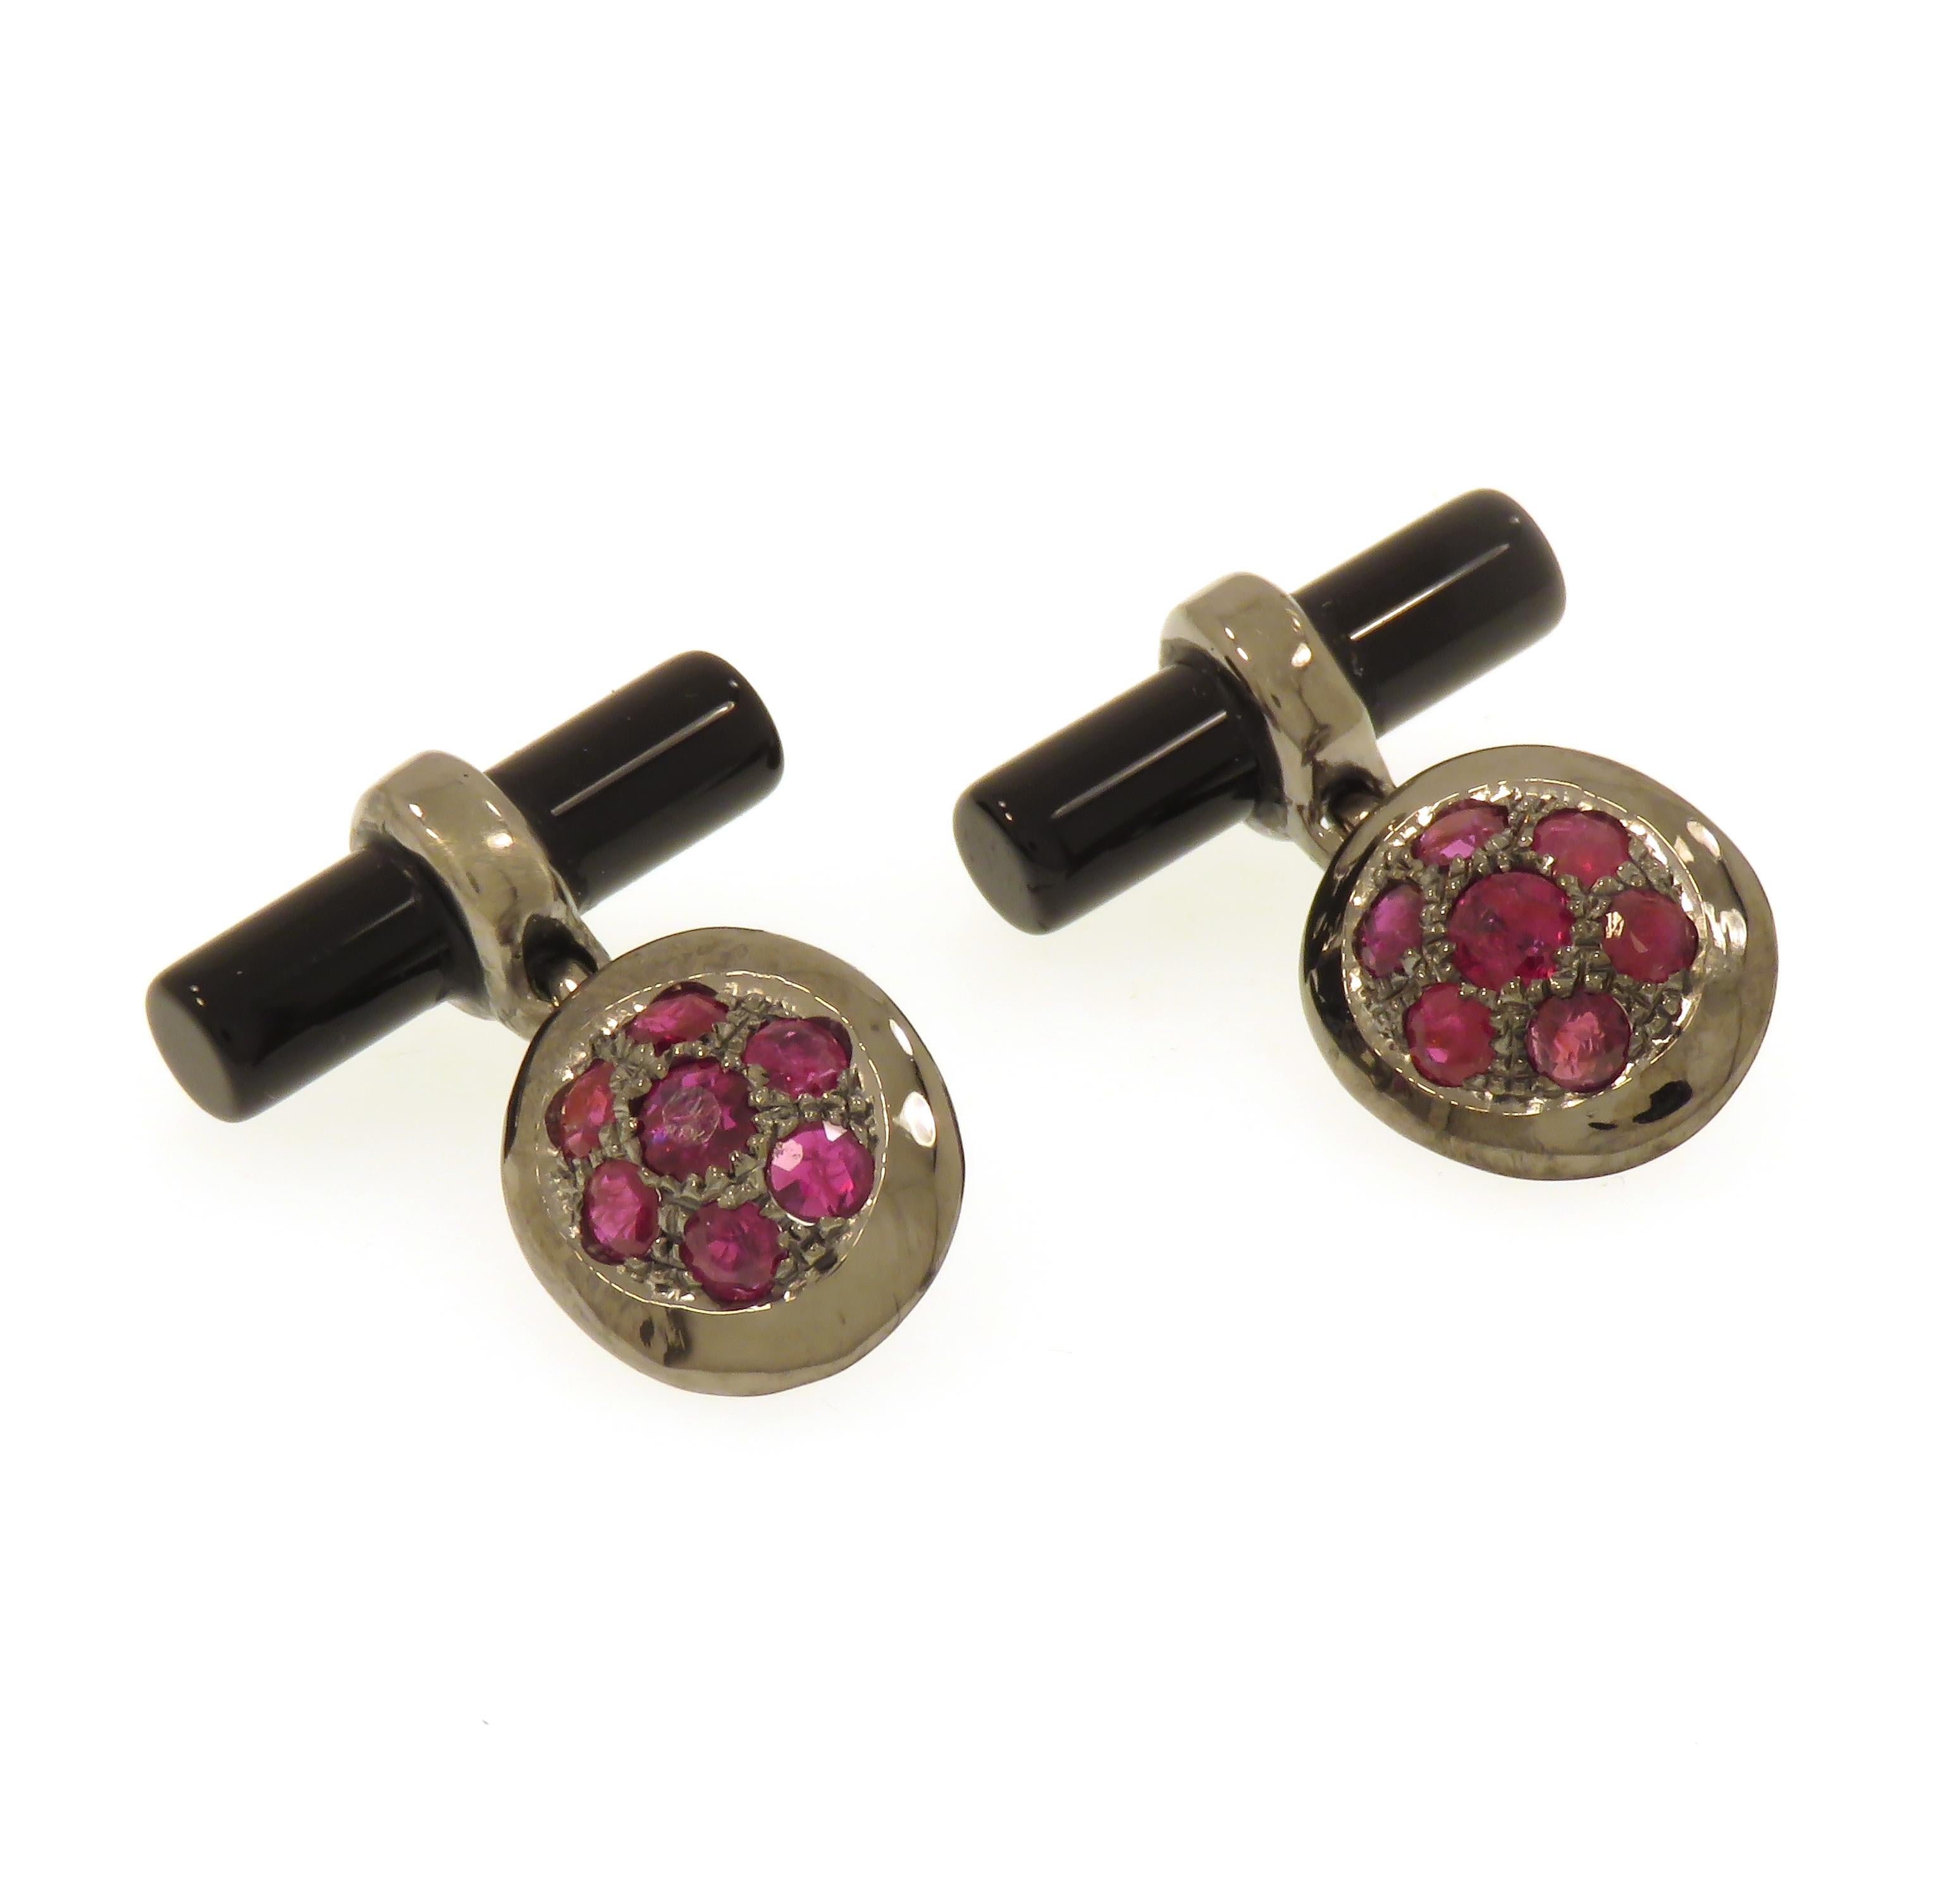 Elegant cufflinks crafted in 9 karat white gold black rhodium plating featuring 14 natural round cut rubies and two natural onyx bars. Oval front dimension is : 15x12 mm / 0.590x0.472 inches, back bar dimension is; 20x5 mm / 0.787x0.196 inches.